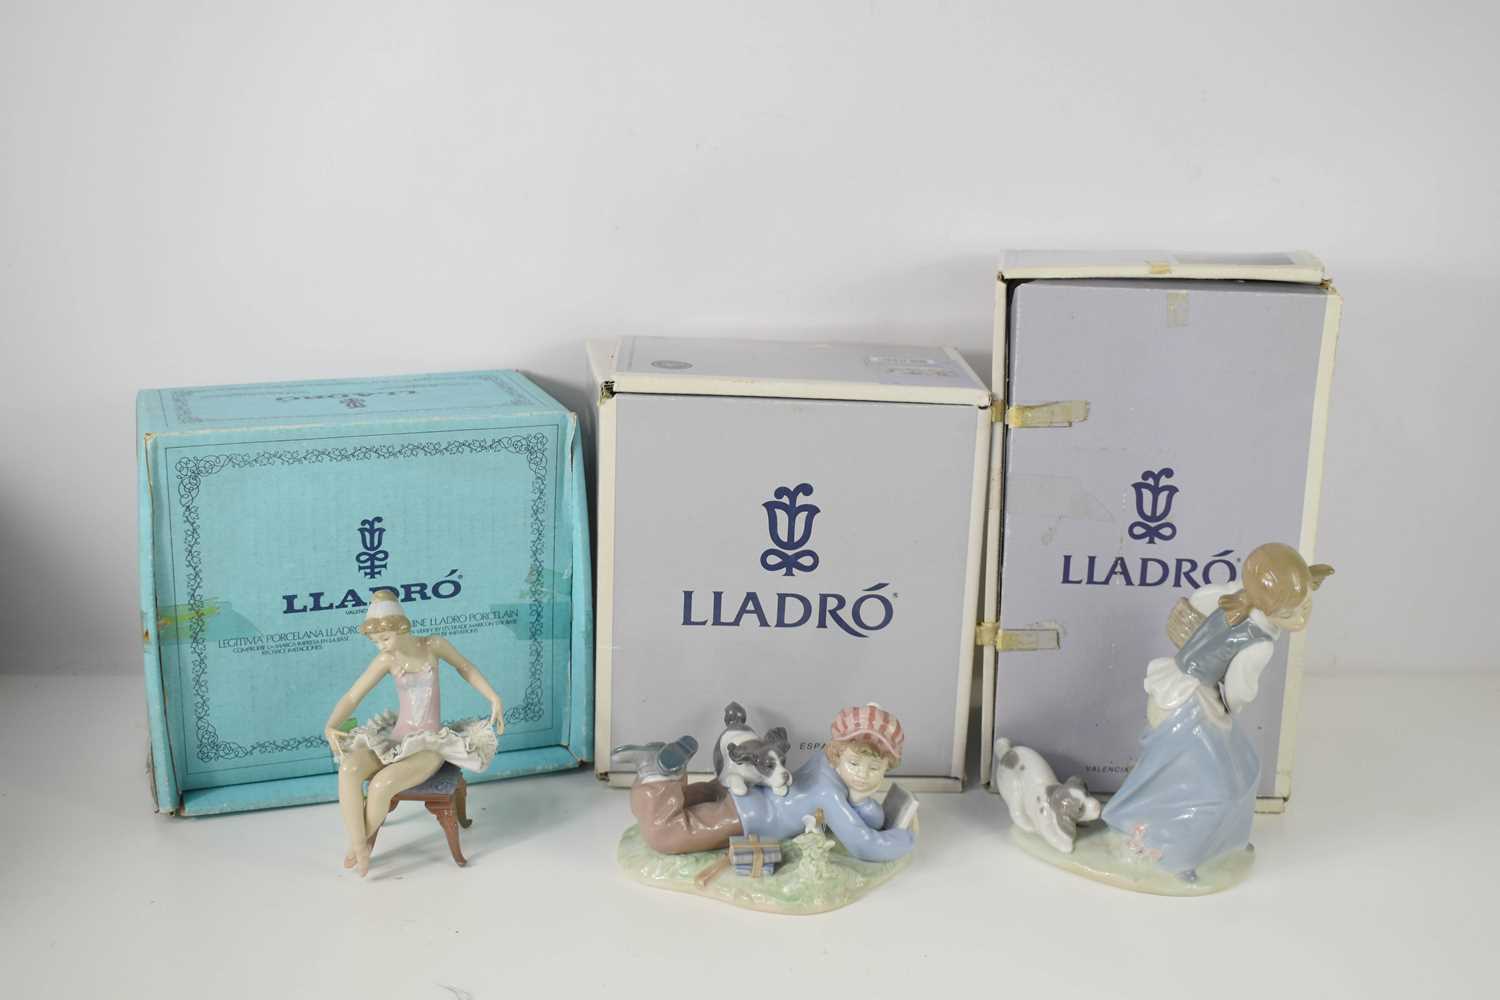 Three porcelain Lladro figurines; Study Buddies, Ballet Dancer, Girl with Puppy, all with the